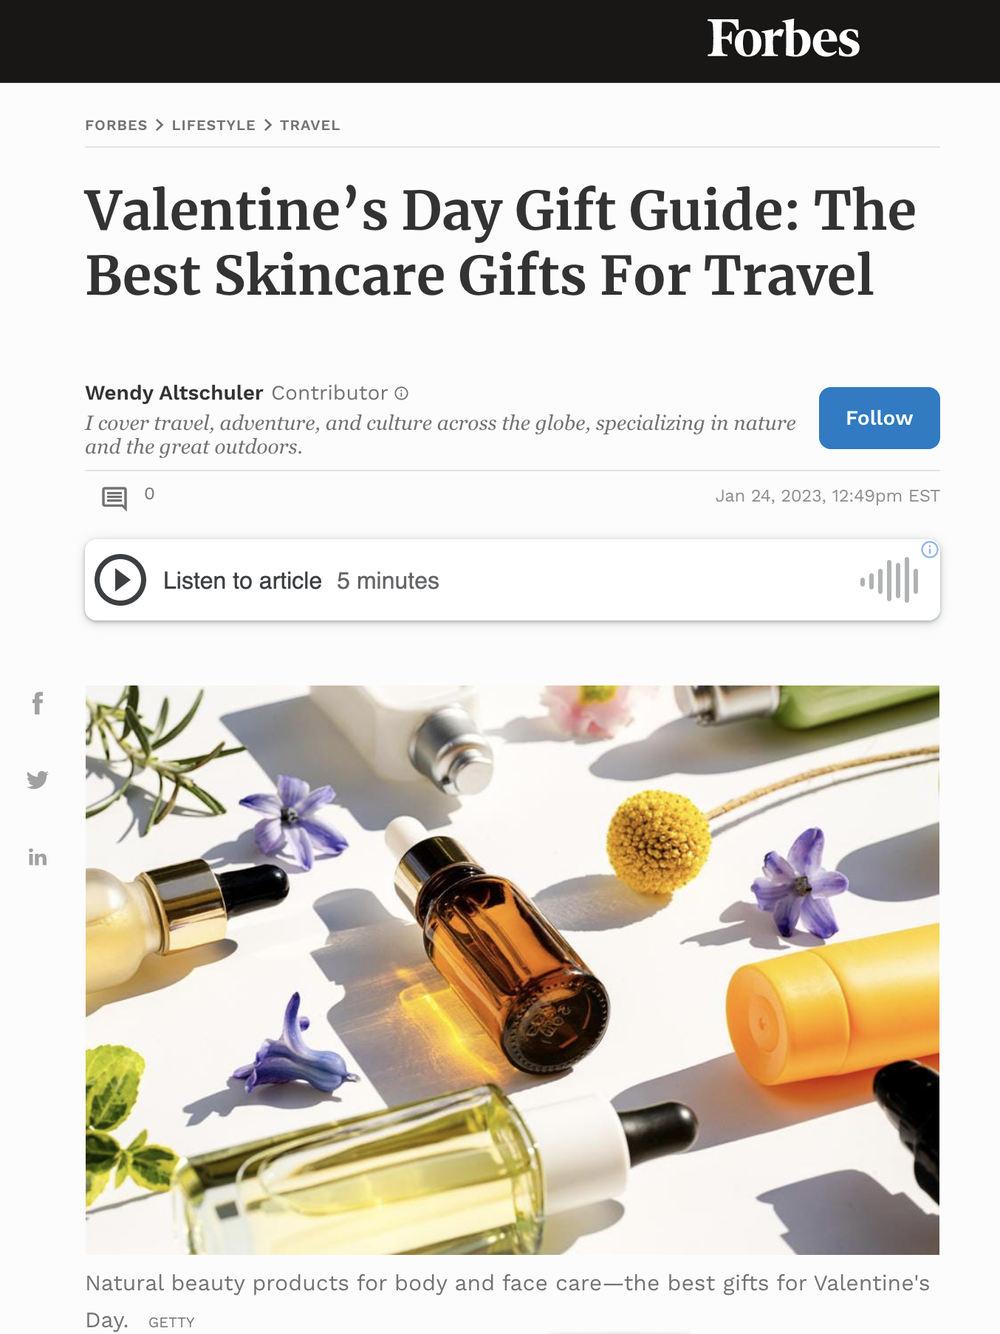 Valentine’s Day Gift Guide: The Best Skincare Gifts For Travel